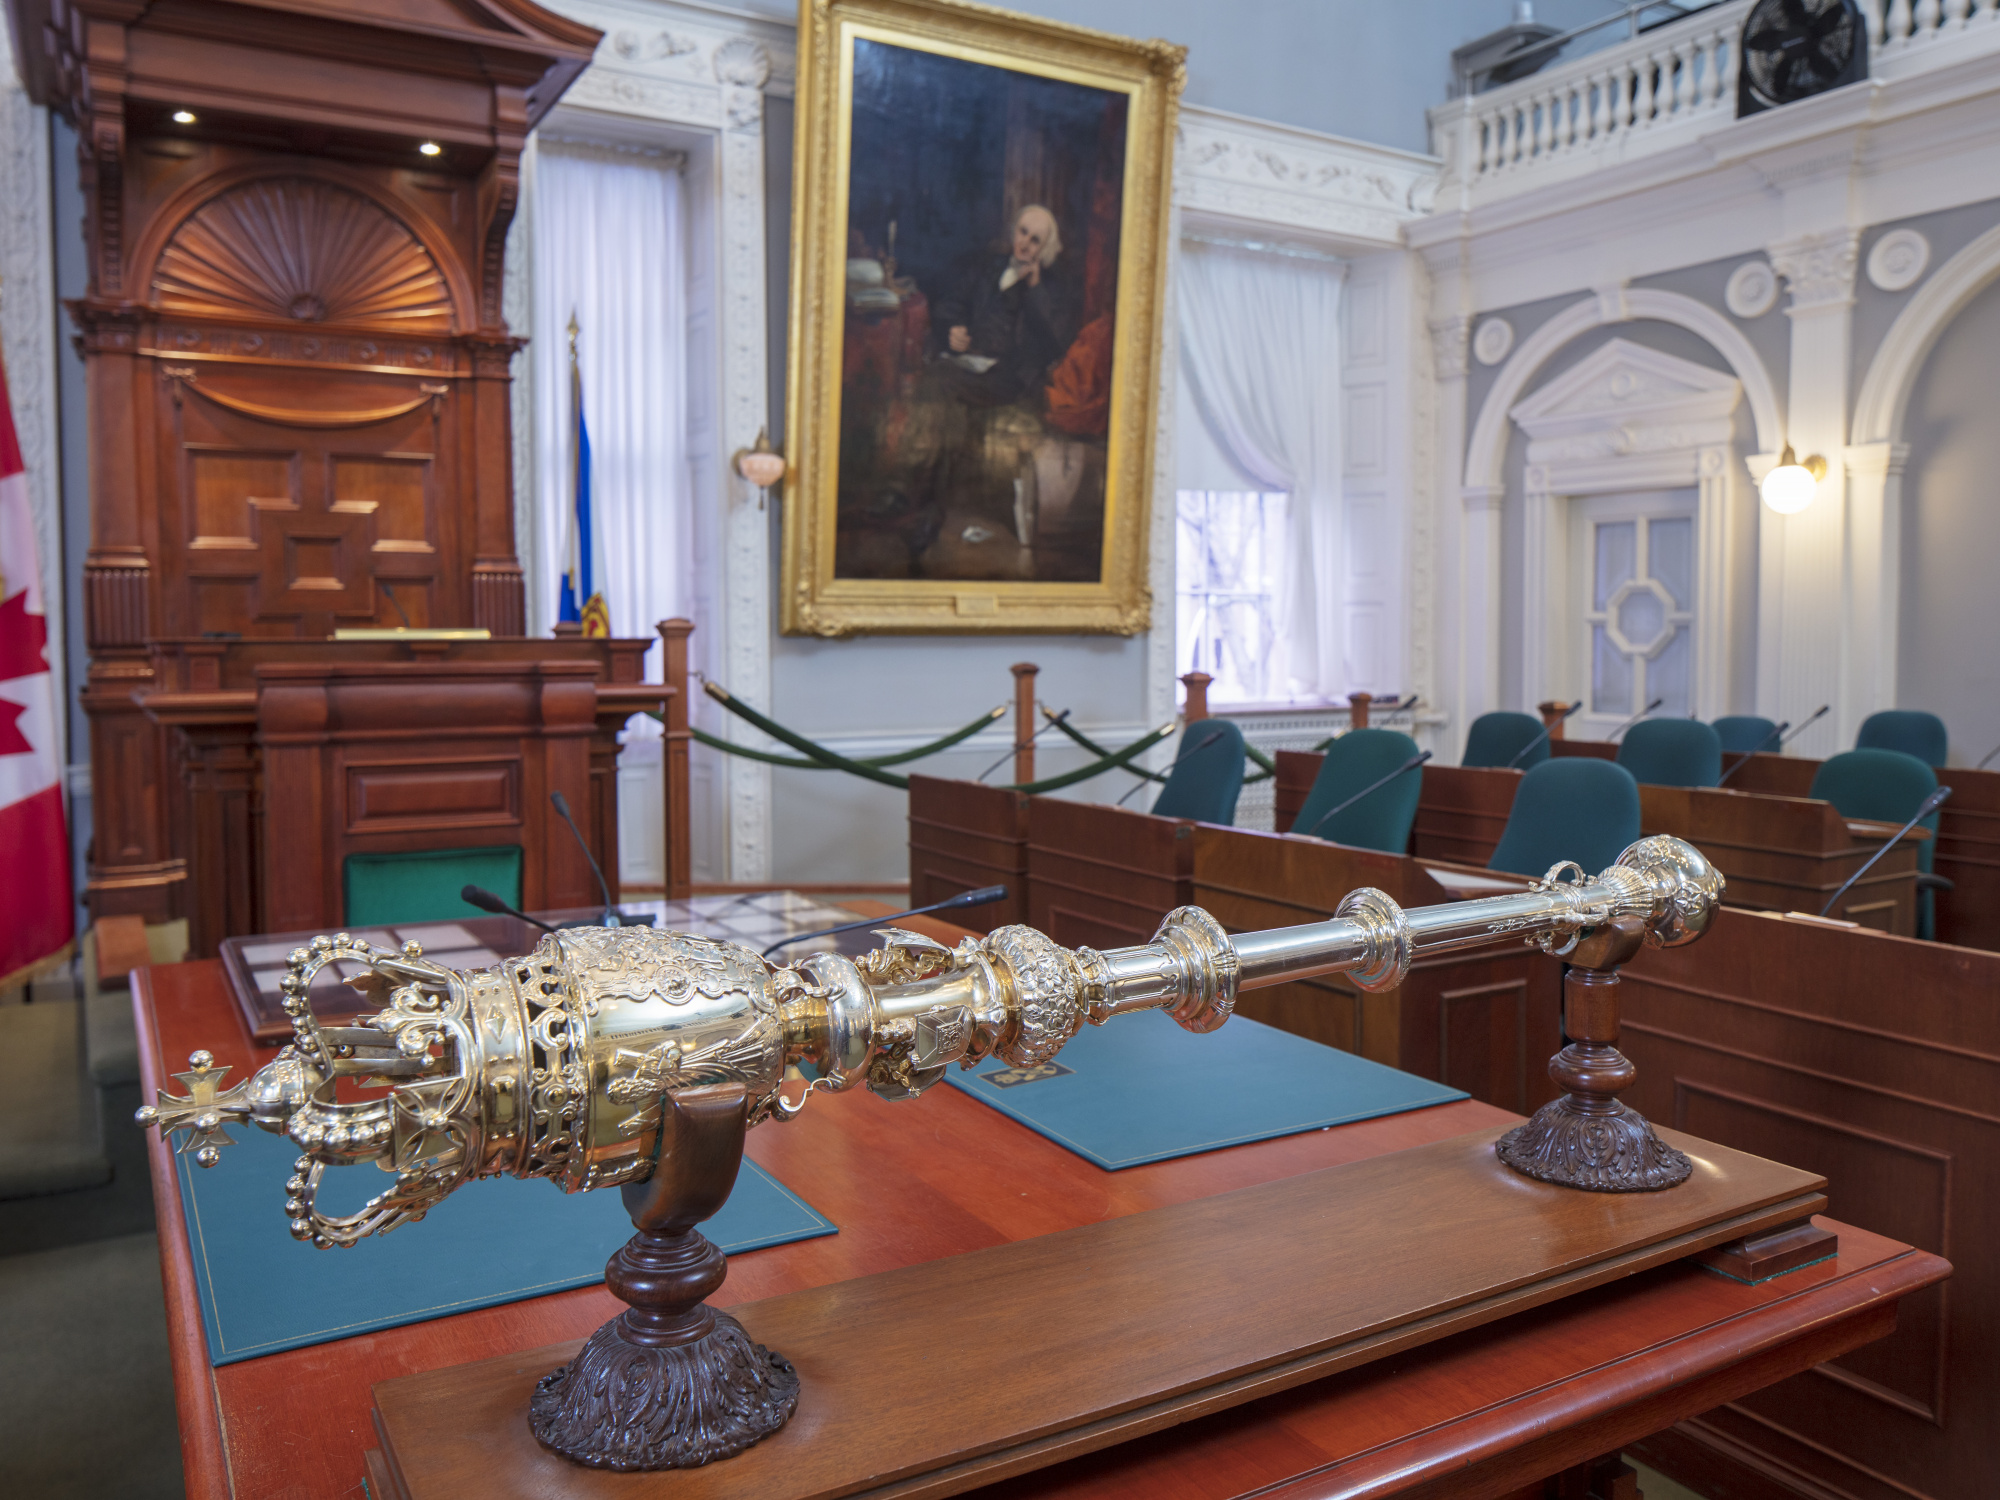 Photo showing mace sitting on a table in front of MLAs’ desks in the legislative chamber at Province House. The Speaker’s desk and a large portrait are in the background